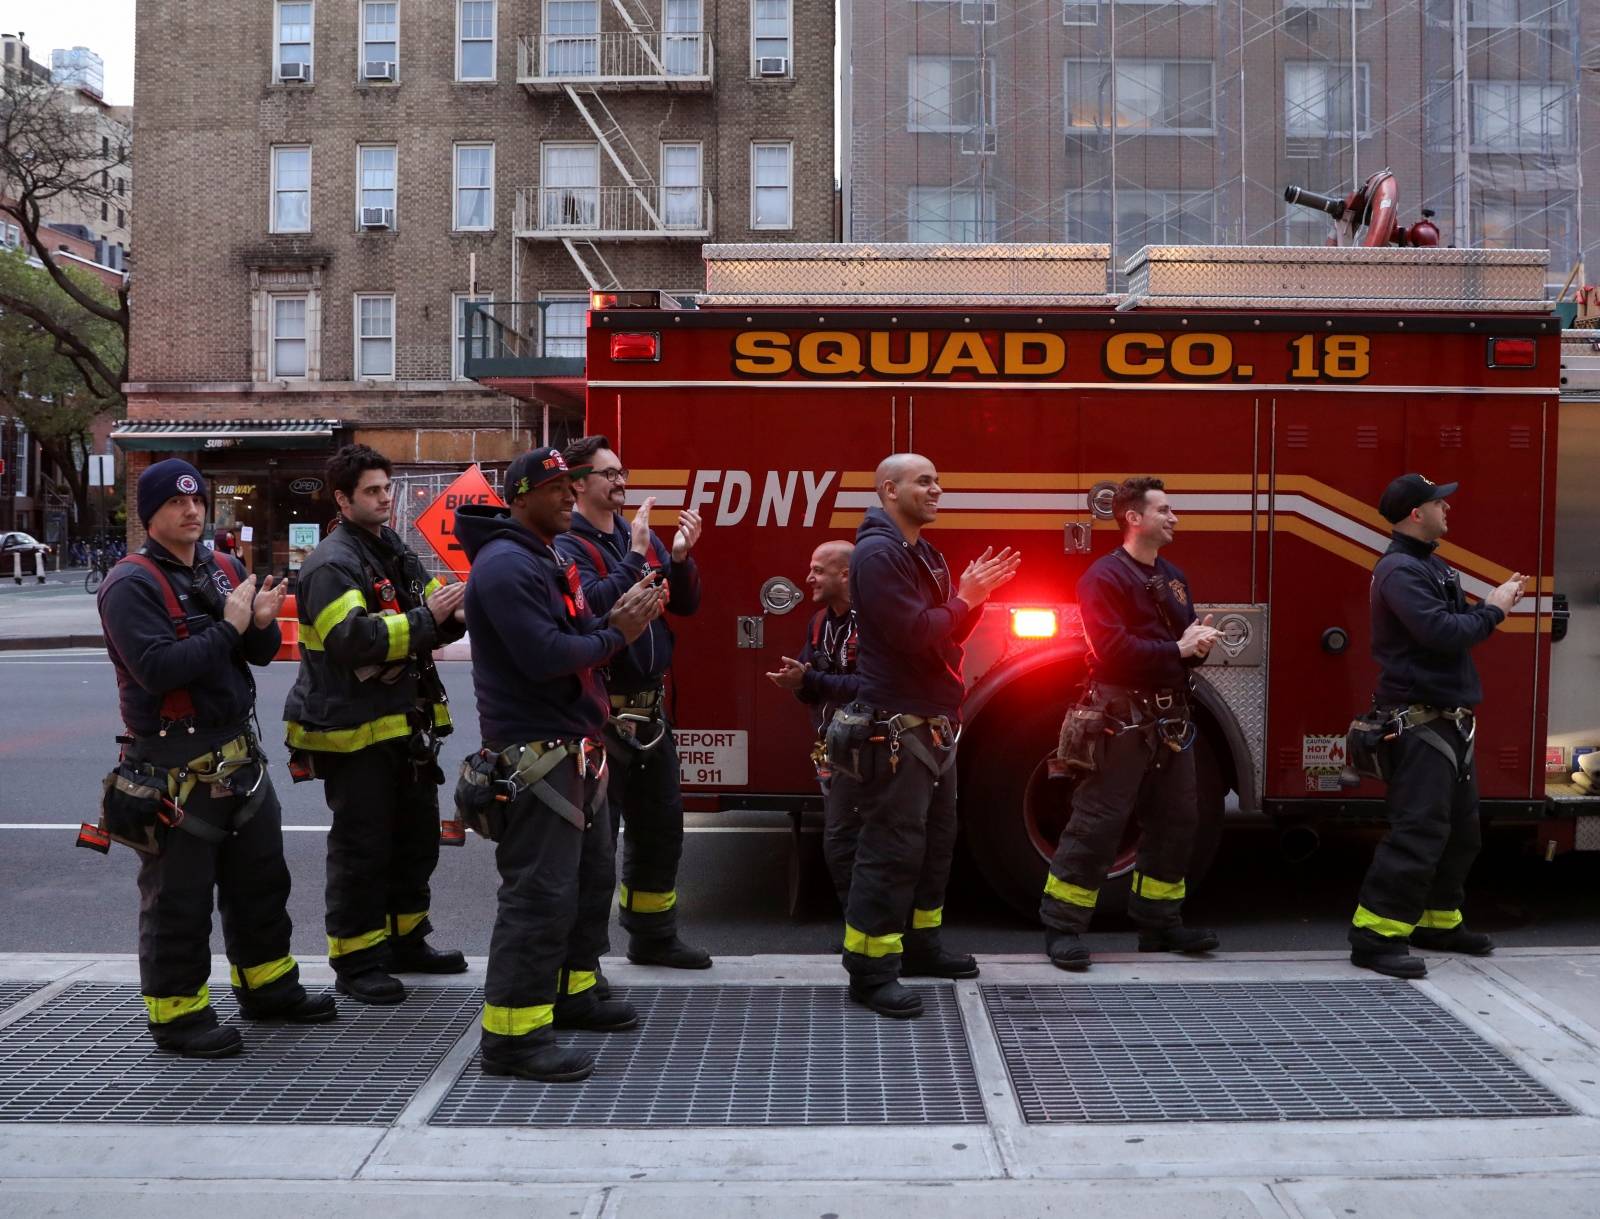 Firefighters and members of the public thank medical workers at 7PM during the outbreak of the coronavirus disease (COVID-19) in New York